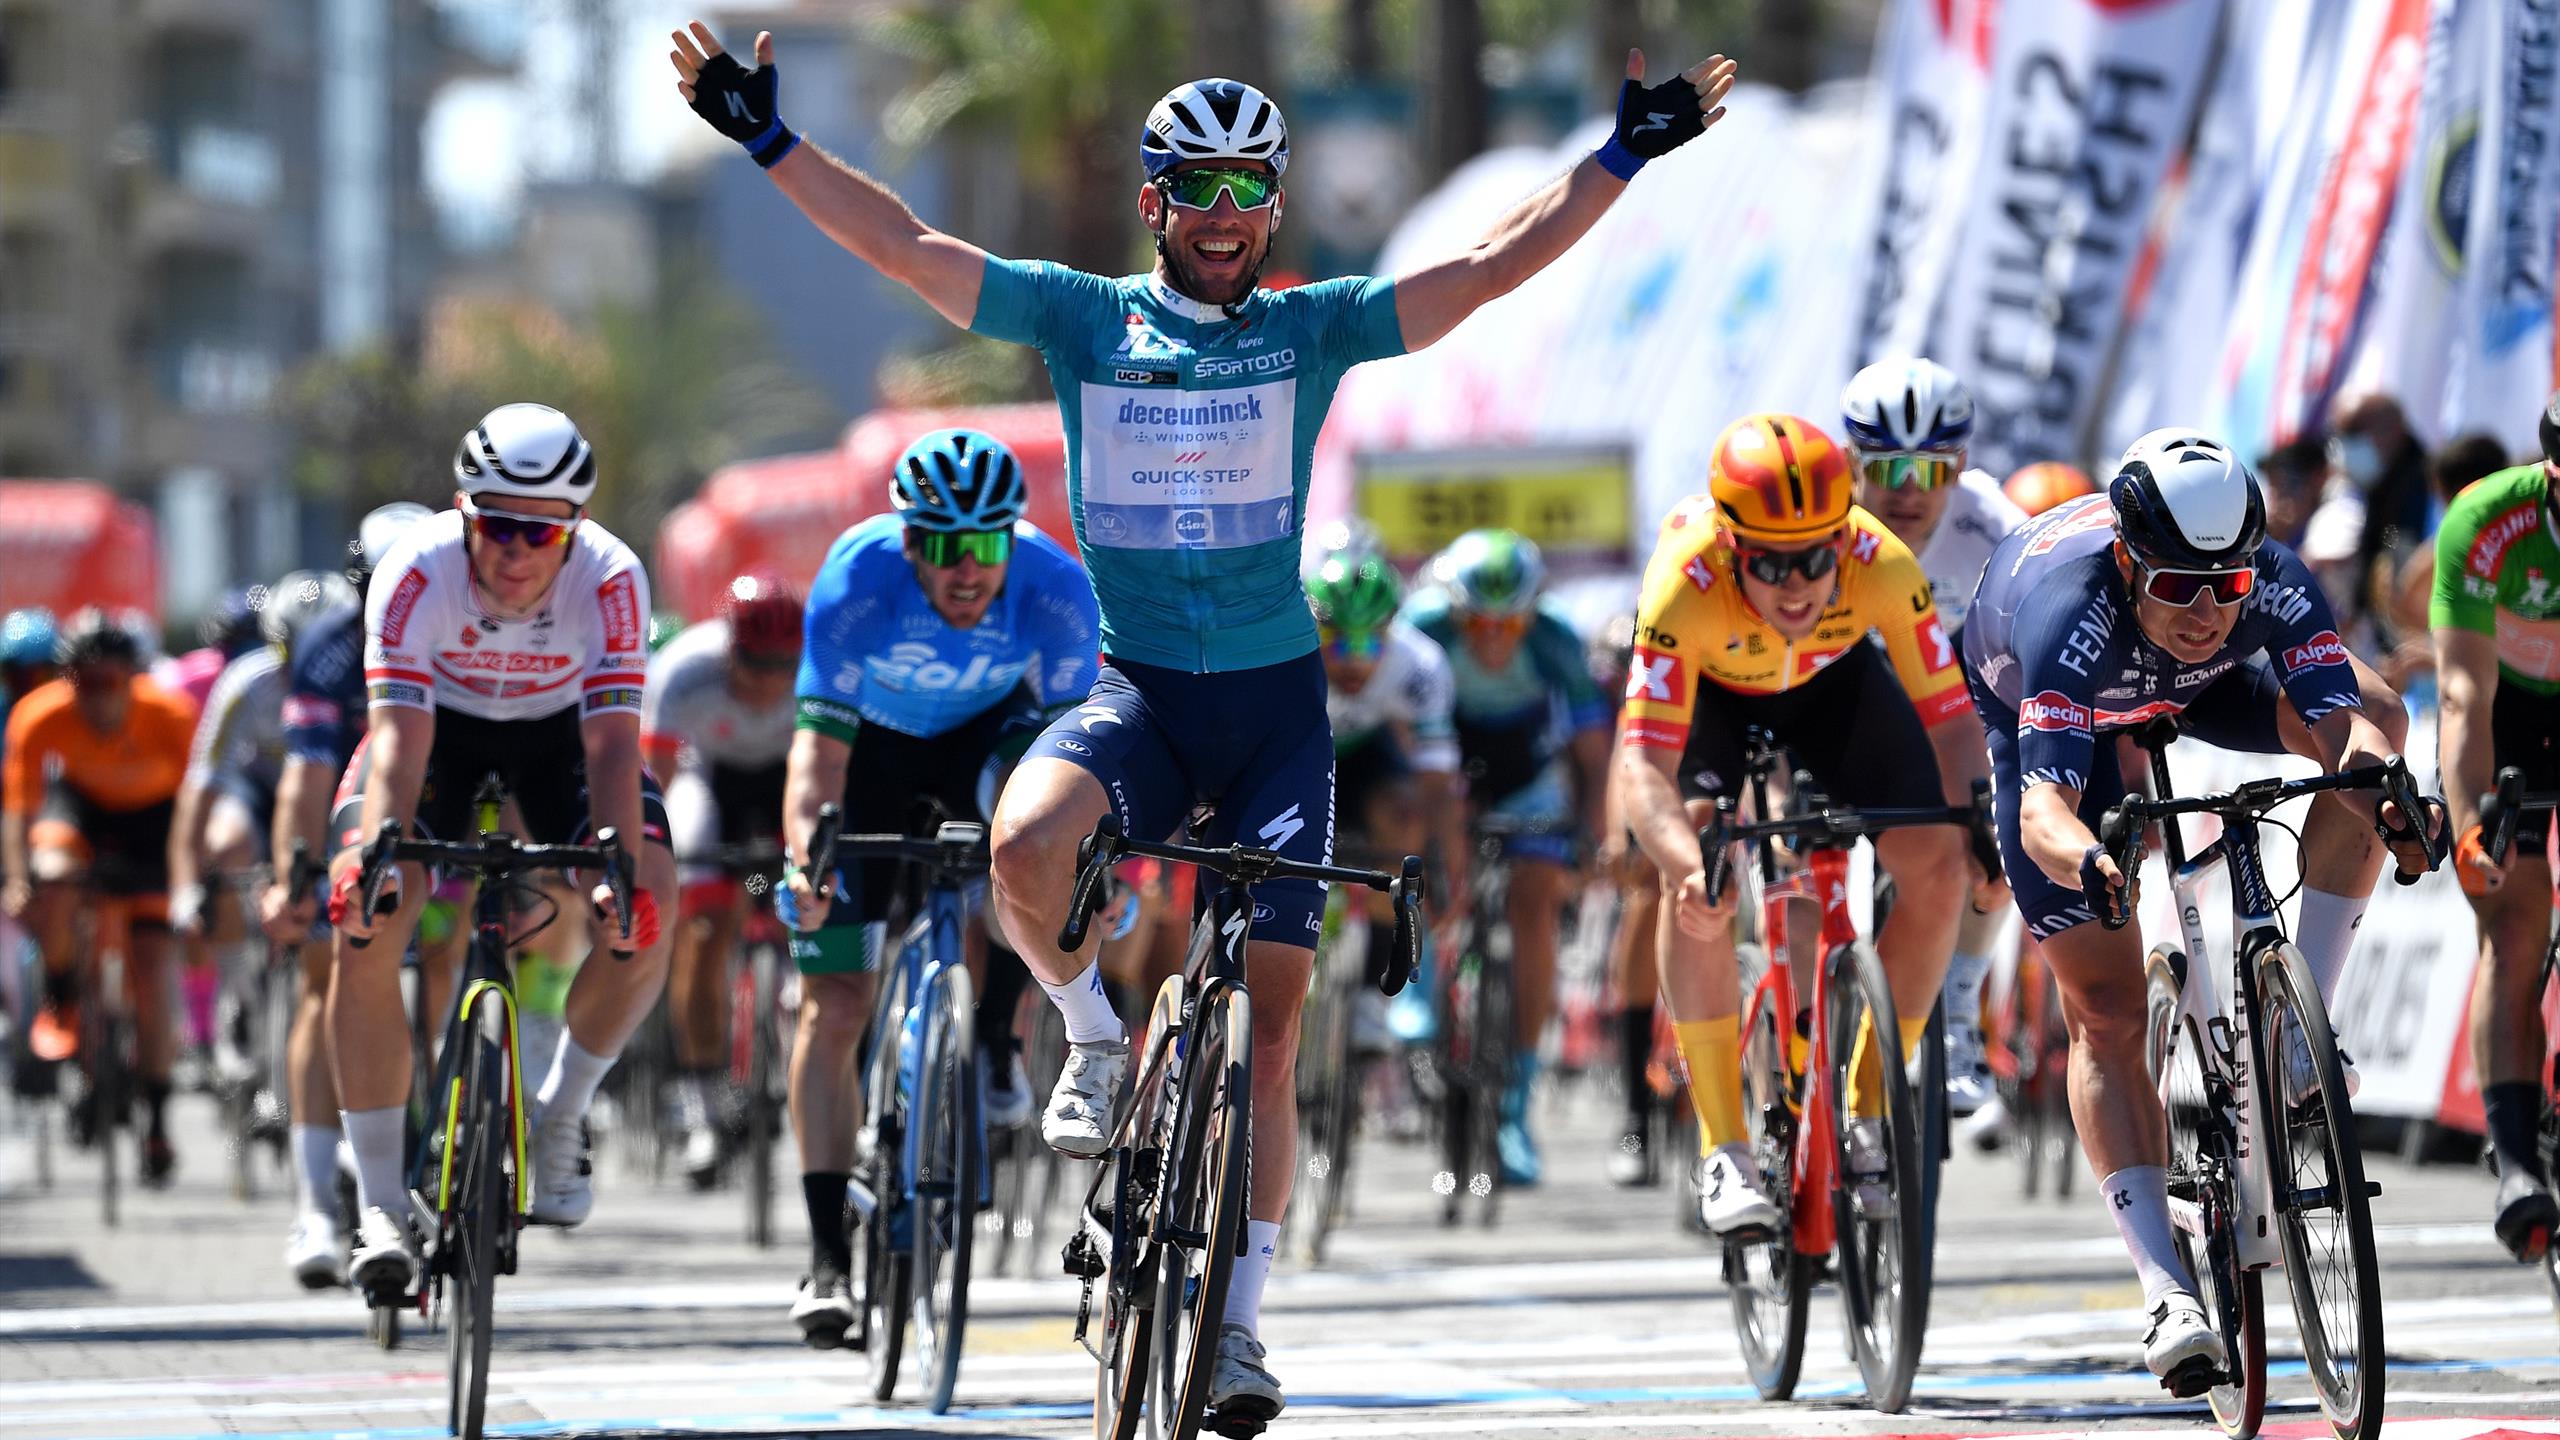 Tour of Turkey cycling 2021 Mark Cavendish grab Stage 4 win - 'Heartbreak for everyone else'